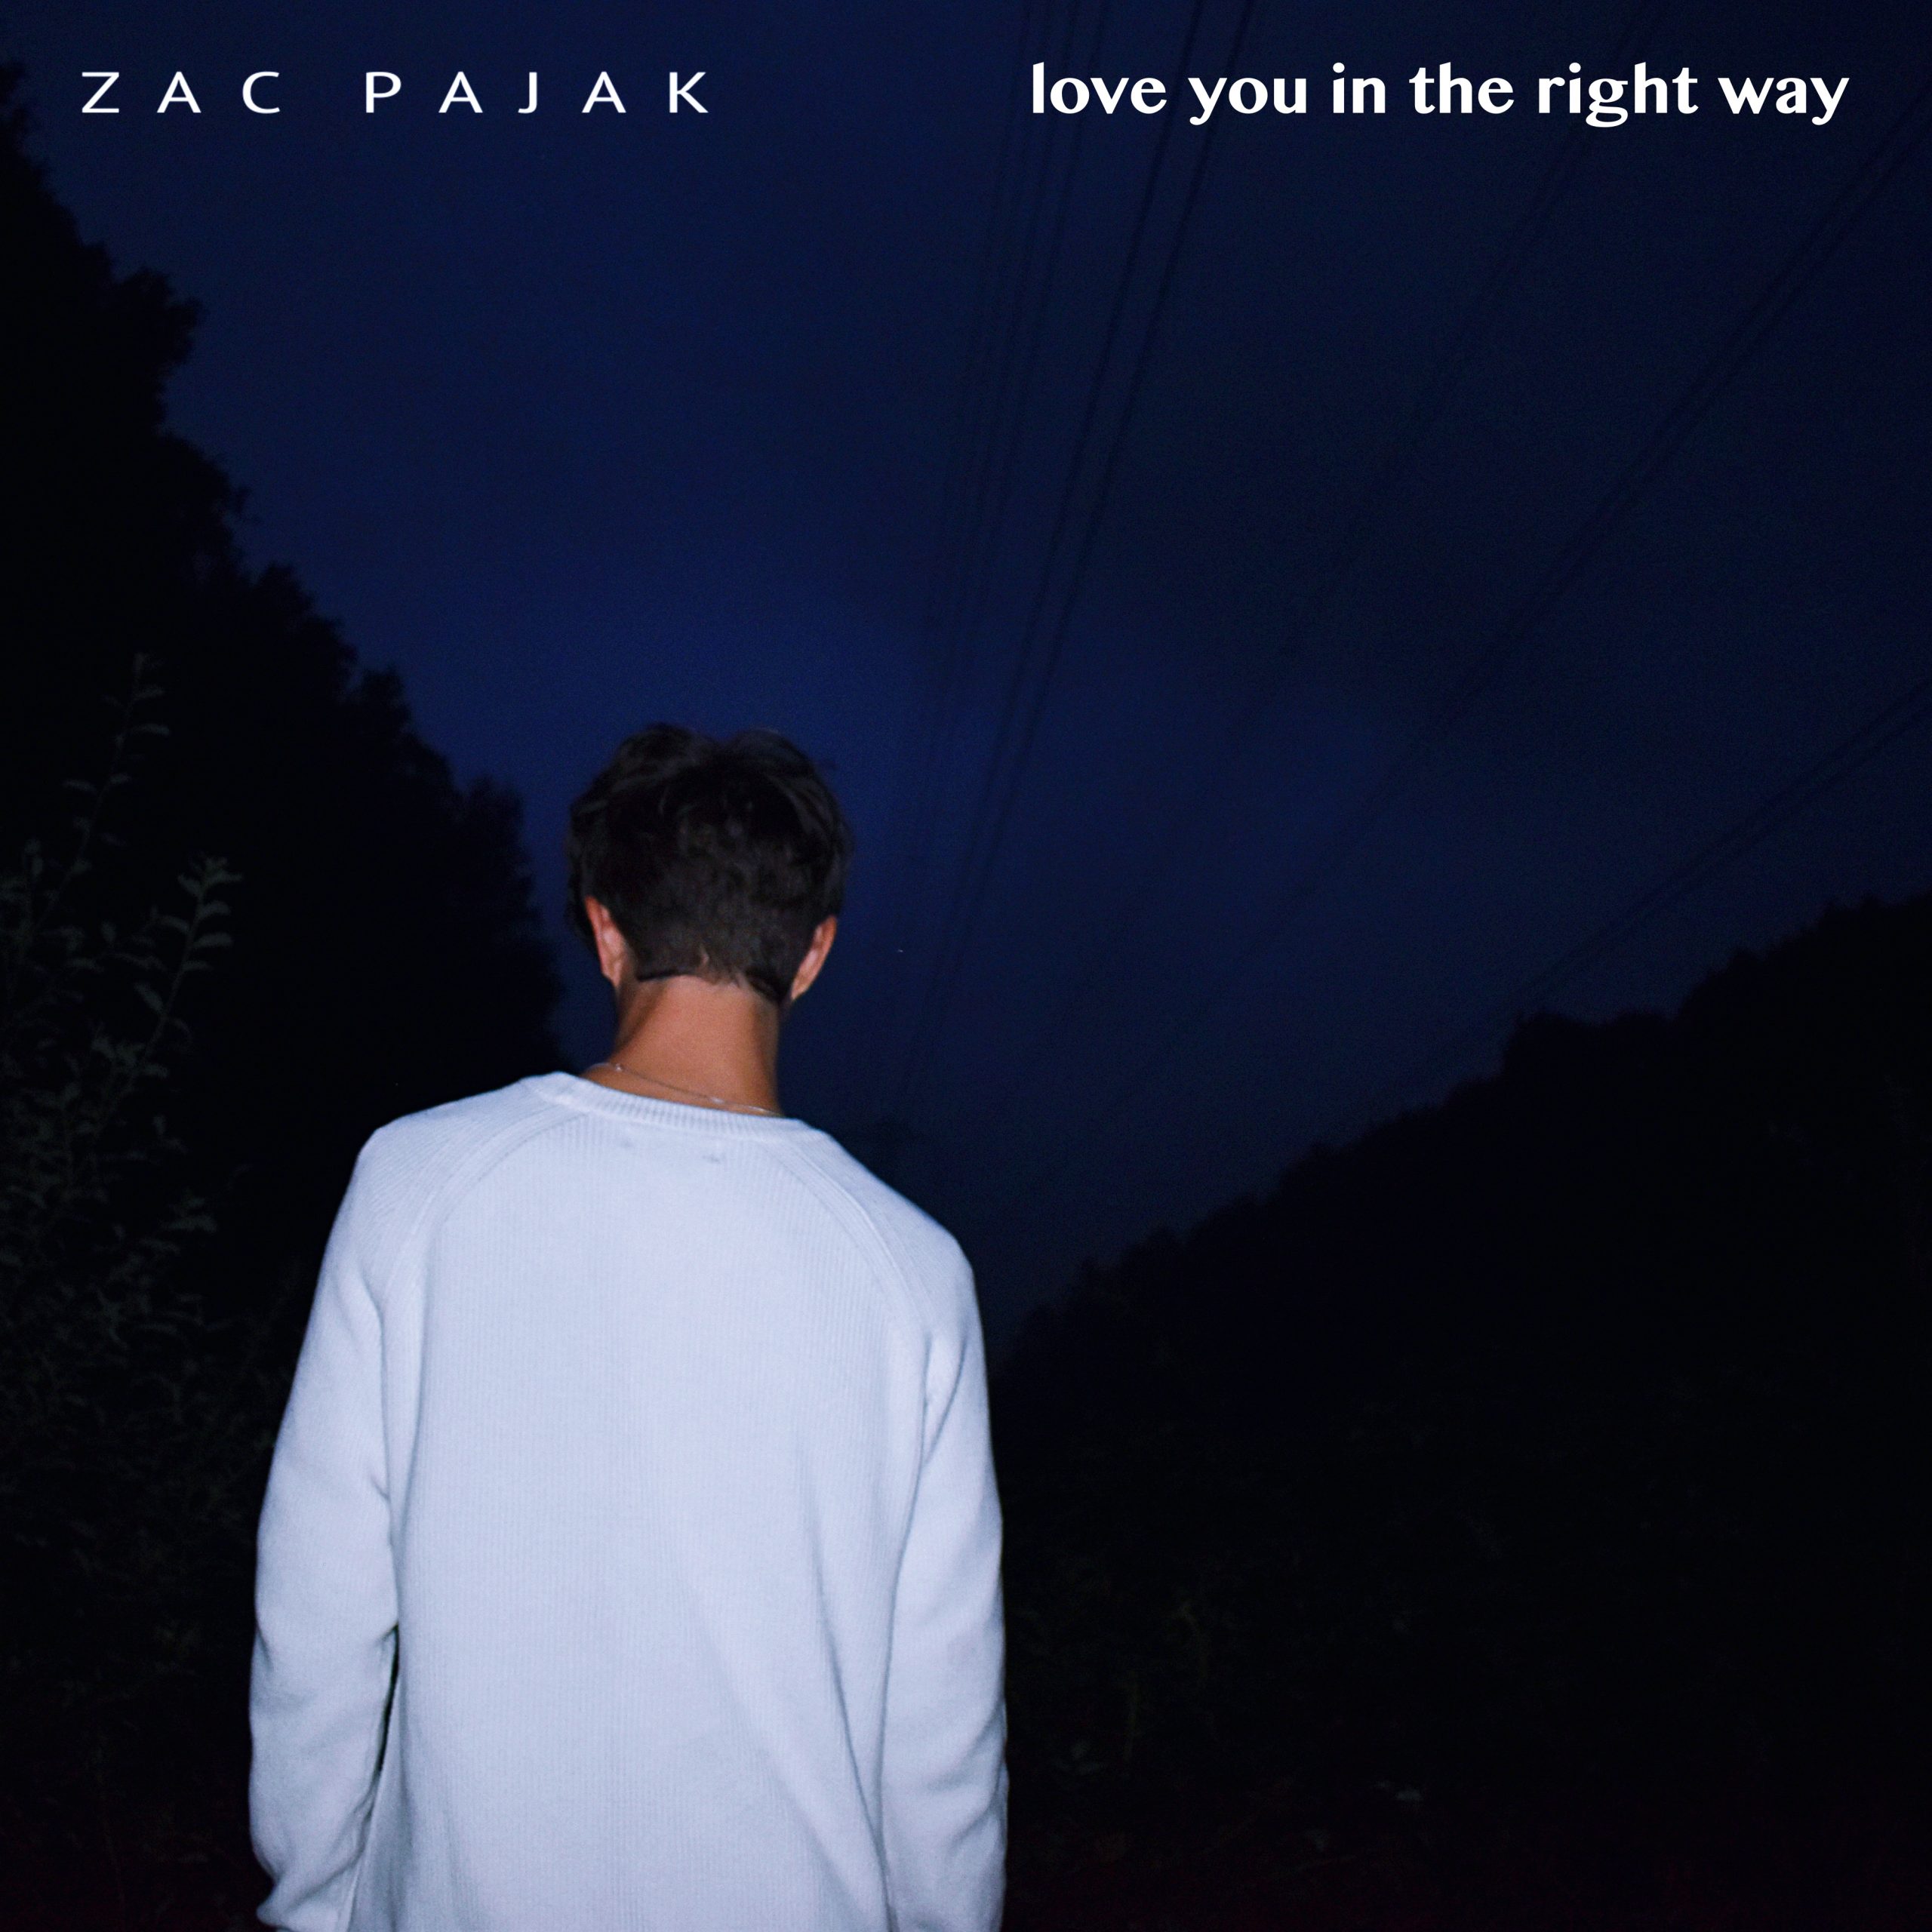 love you in the right way - zac pajak - UK - indie - indie music - indie pop - indie rock - new music - music blog - wolf in a suit - wolfinasuit - wolf in a suit blog - wolf in a suit music blog